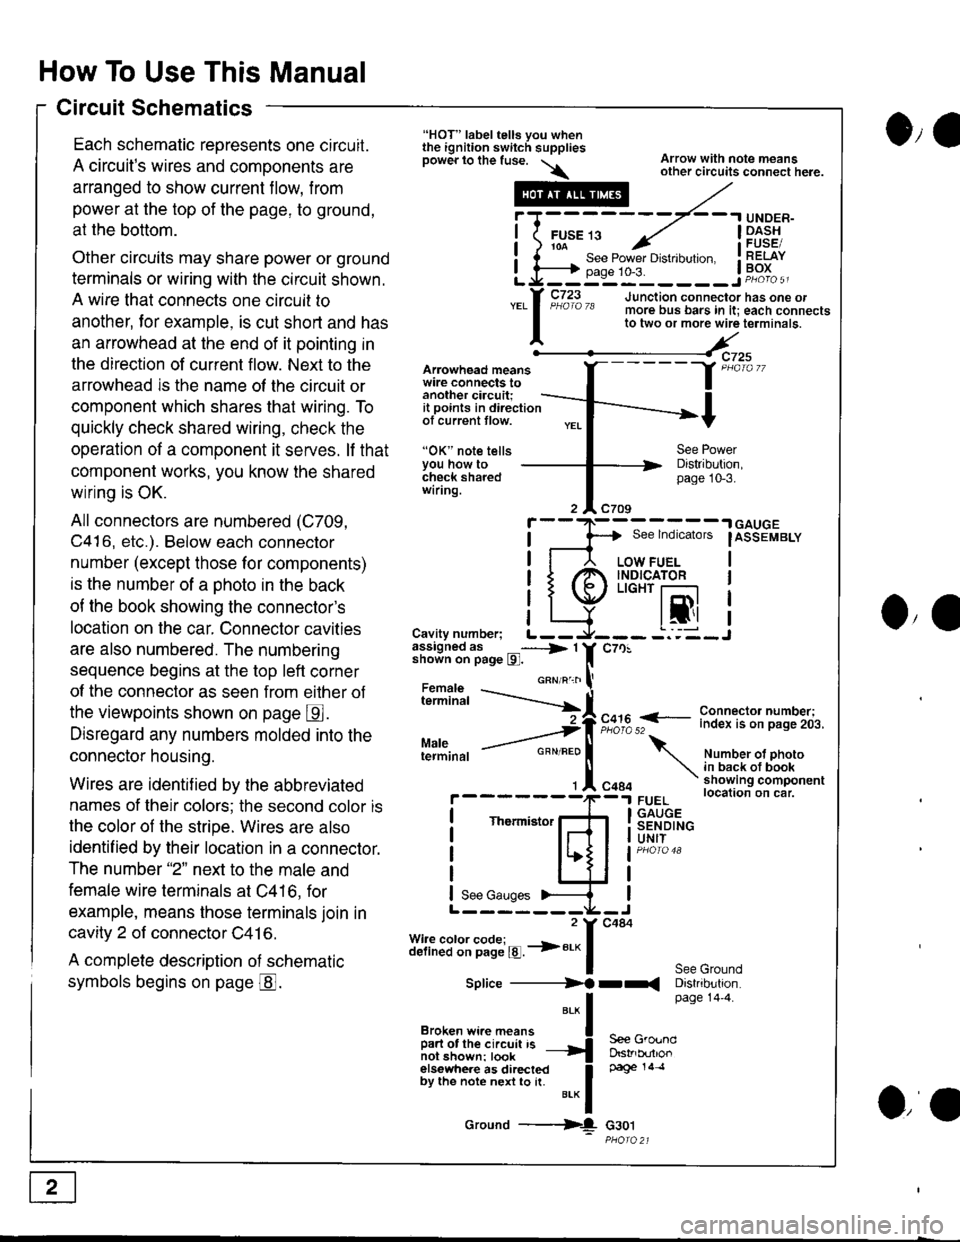 HONDA INTEGRA 1998 4.G Workshop Manual How To Use This Manual
Circuit Schematics
Each schematic reoresents one circuit.
A circuits wires and components are
arranged to show current flow, from
power at the top of the page, to ground,
at th